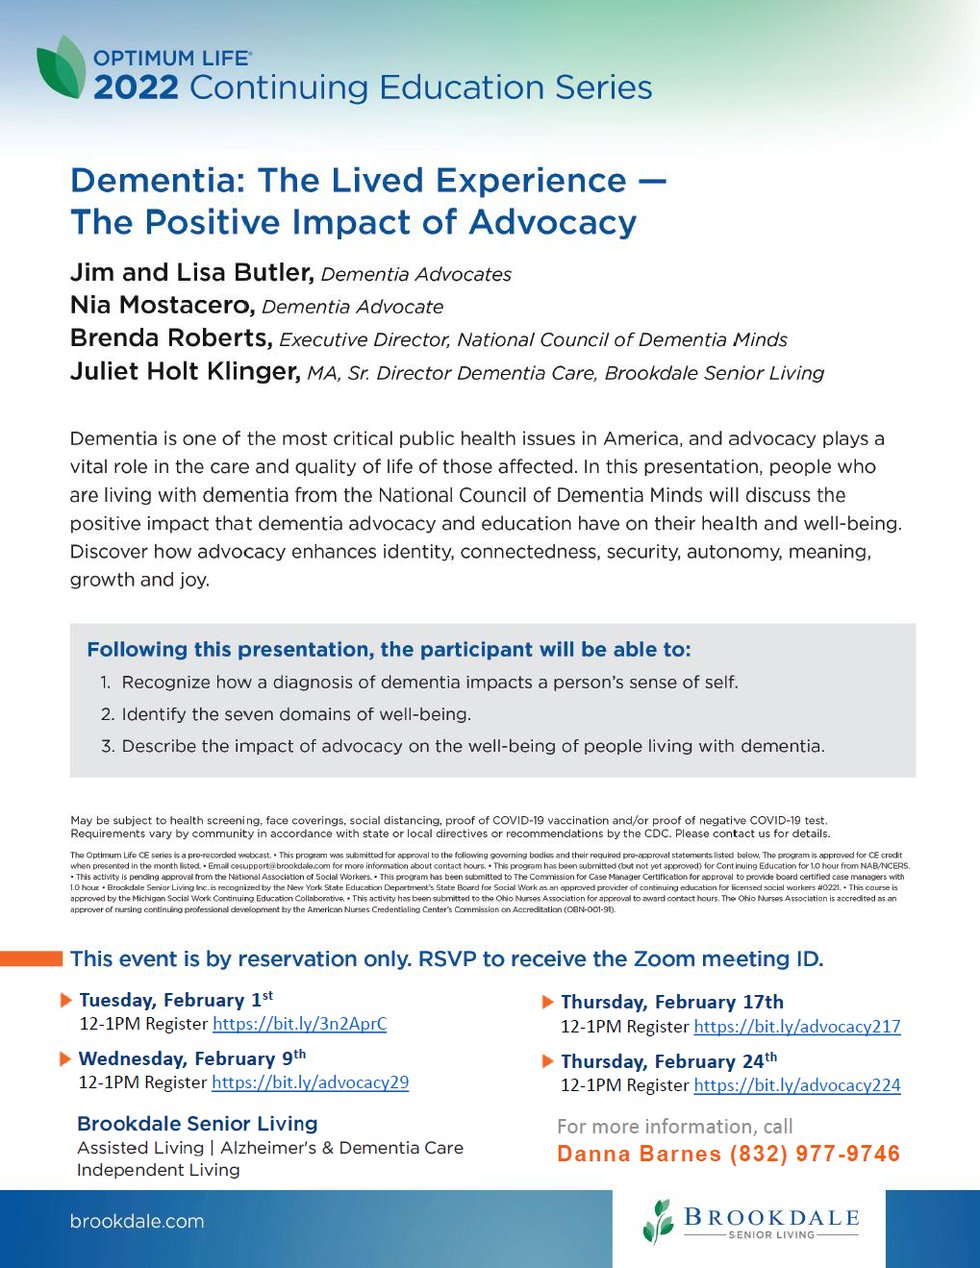 OL CE February - Dementia The Lived Experience - The Positive Impact of Advocacy.png